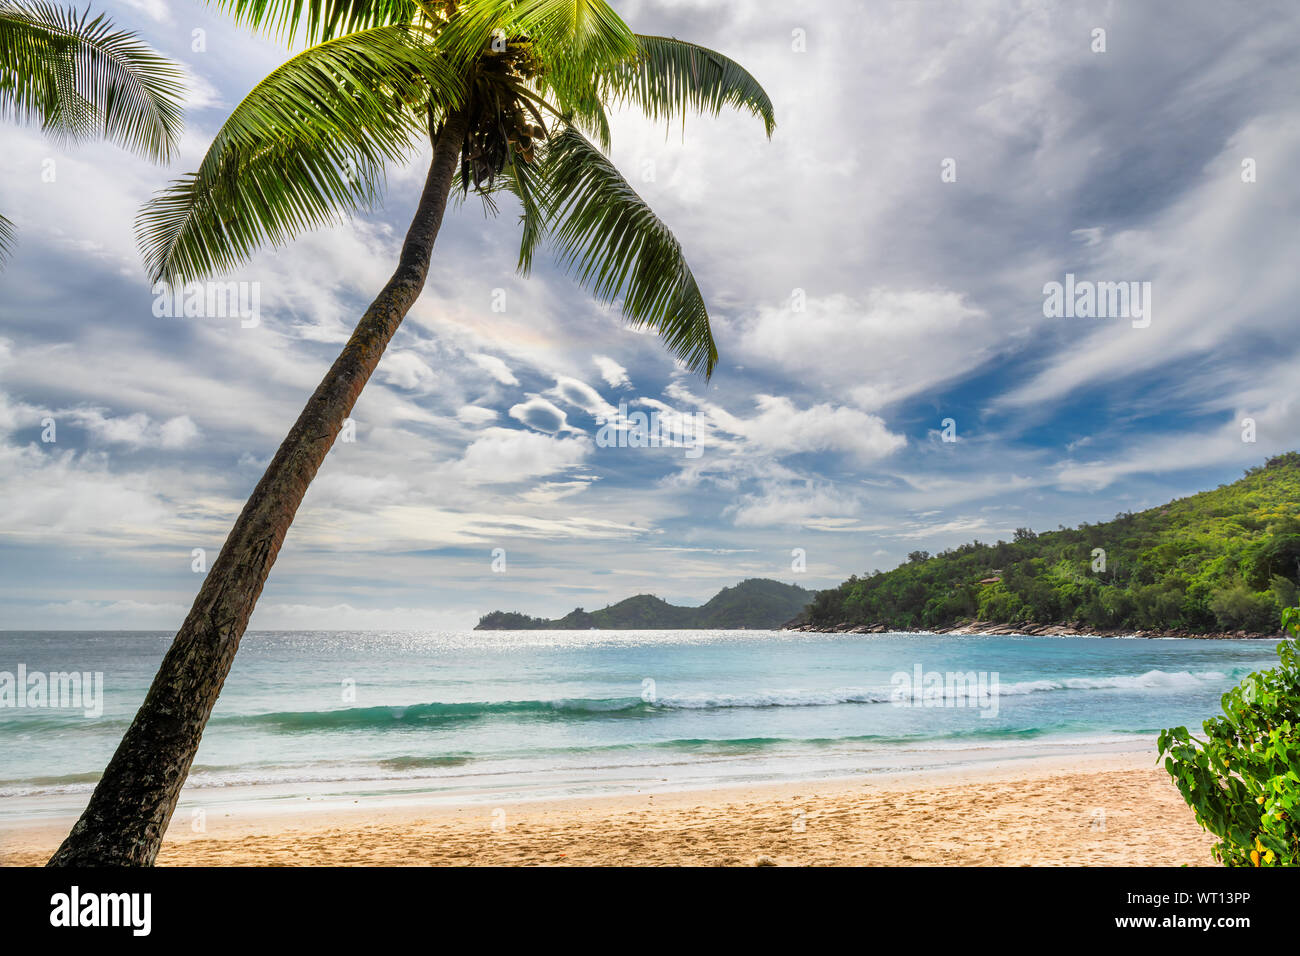 Palm trees on exotic beach at sunset in Paradise island. Stock Photo